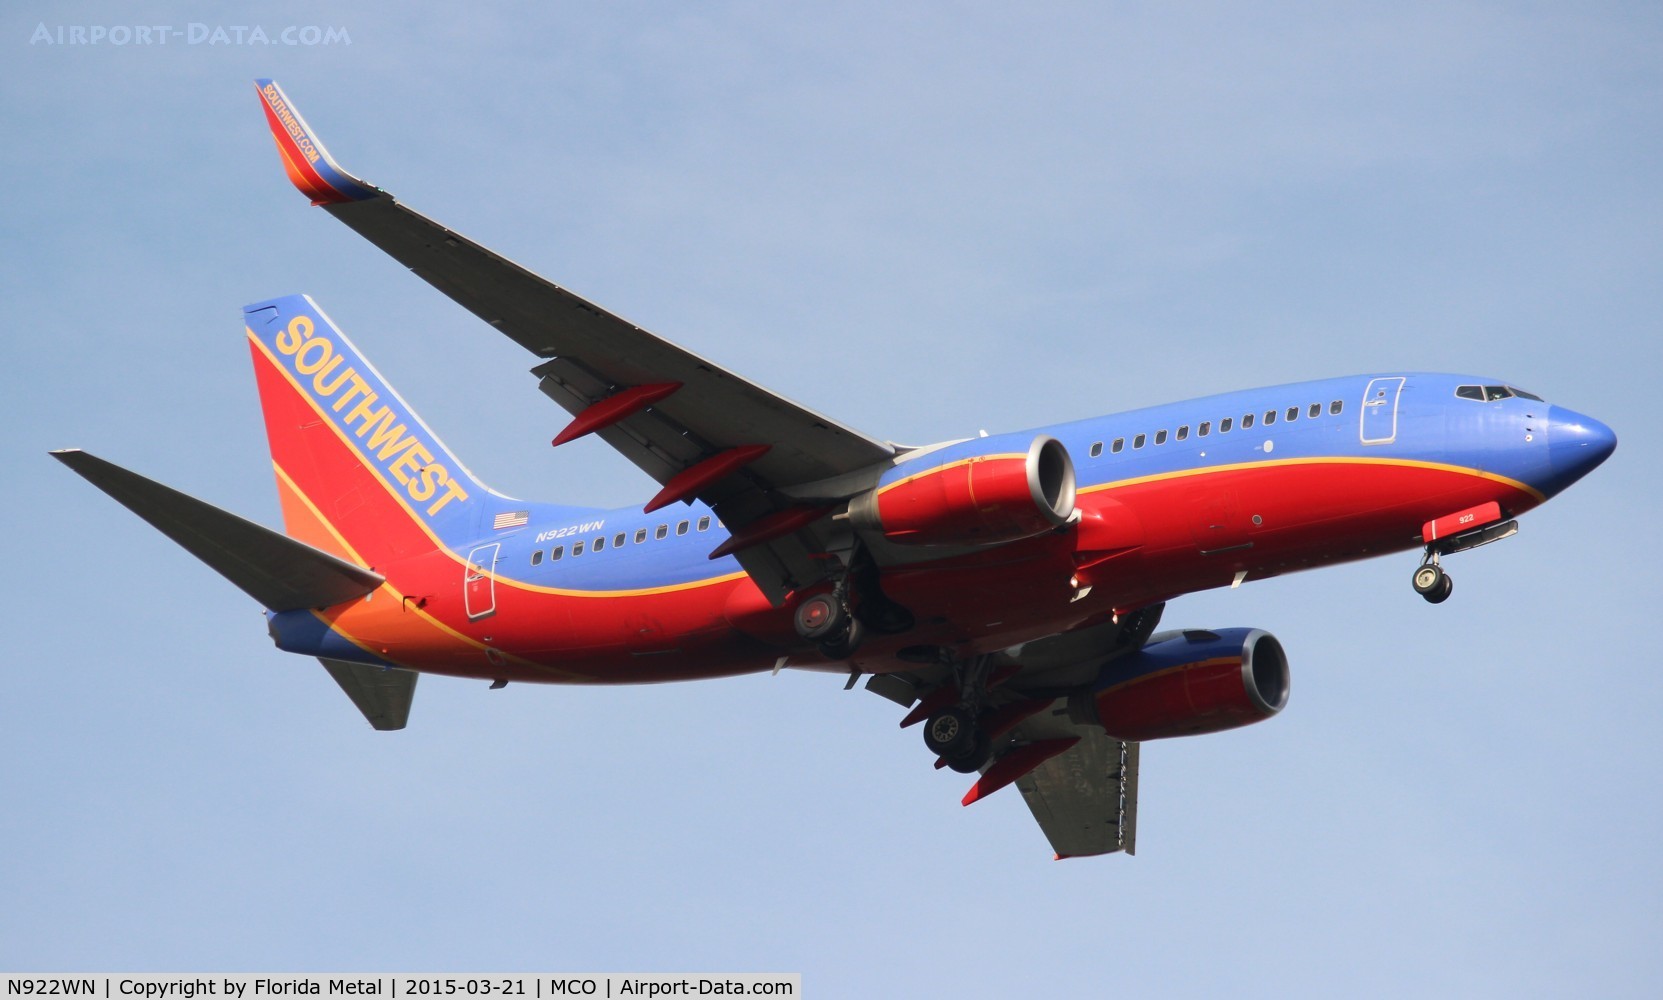 N922WN, 2008 Boeing 737-7H4 C/N 32461, Southwest (before it became Tennessee One)